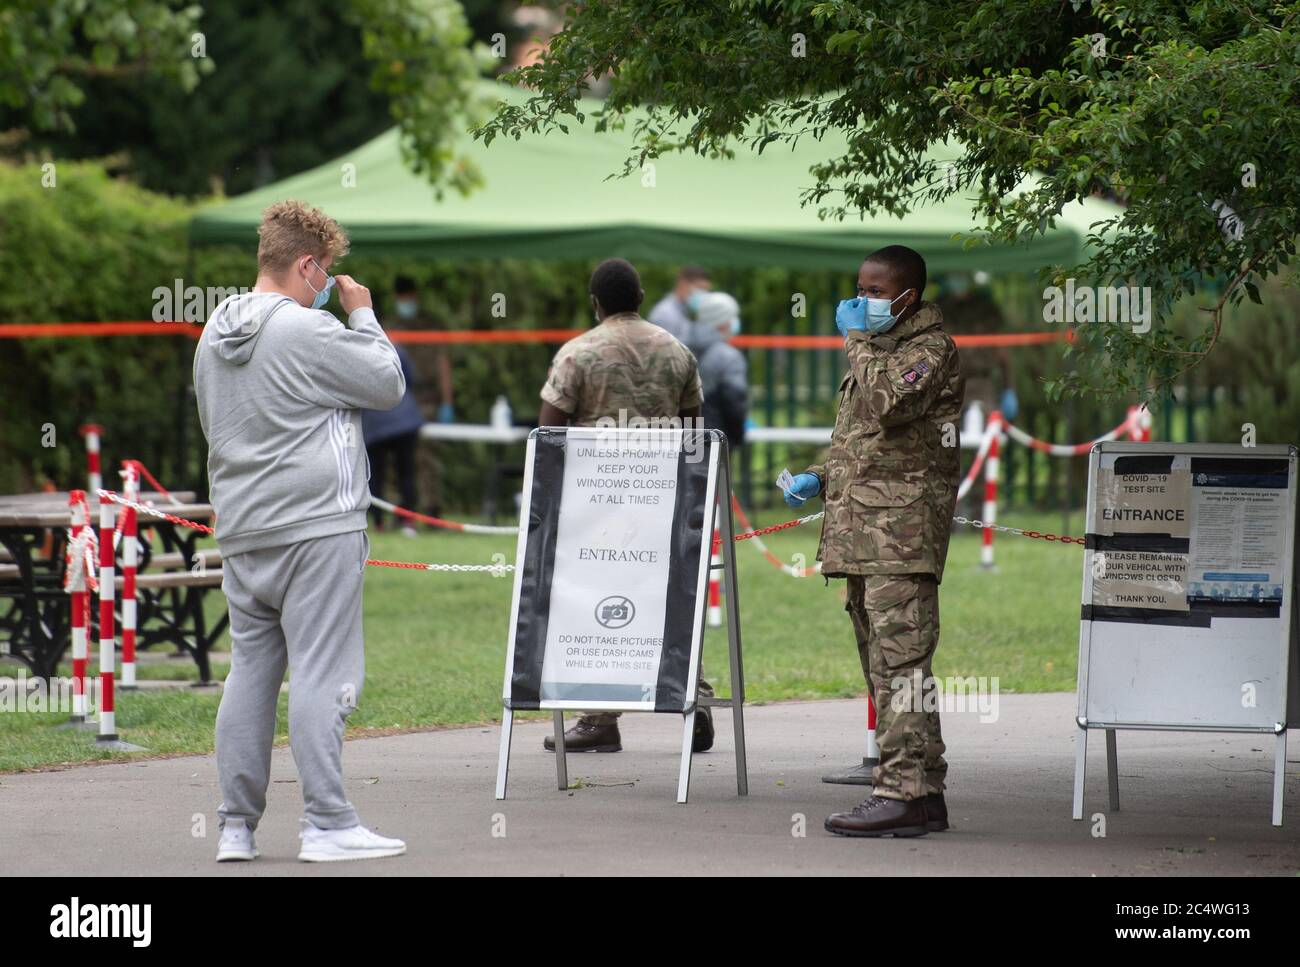 Members of the military operate a walk-in mobile Covid-19 testing centre at Spinney Hill Park in Leicester as the city may be the first UK location to be subjected to a local lockdown after a spike in coronavirus cases. Stock Photo